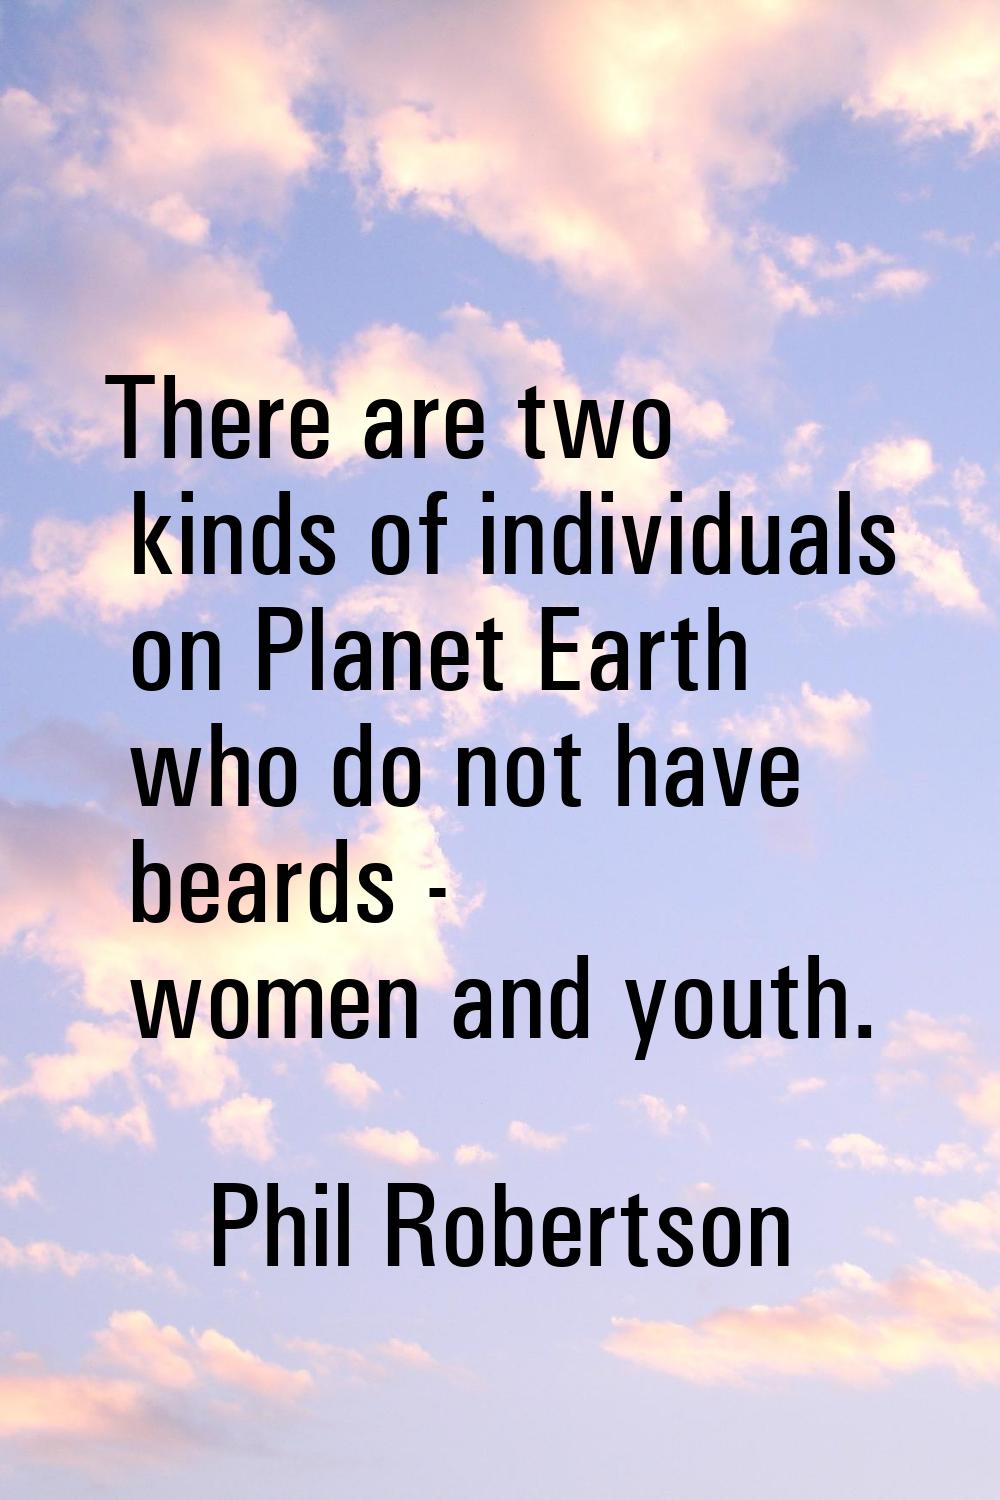 There are two kinds of individuals on Planet Earth who do not have beards - women and youth.